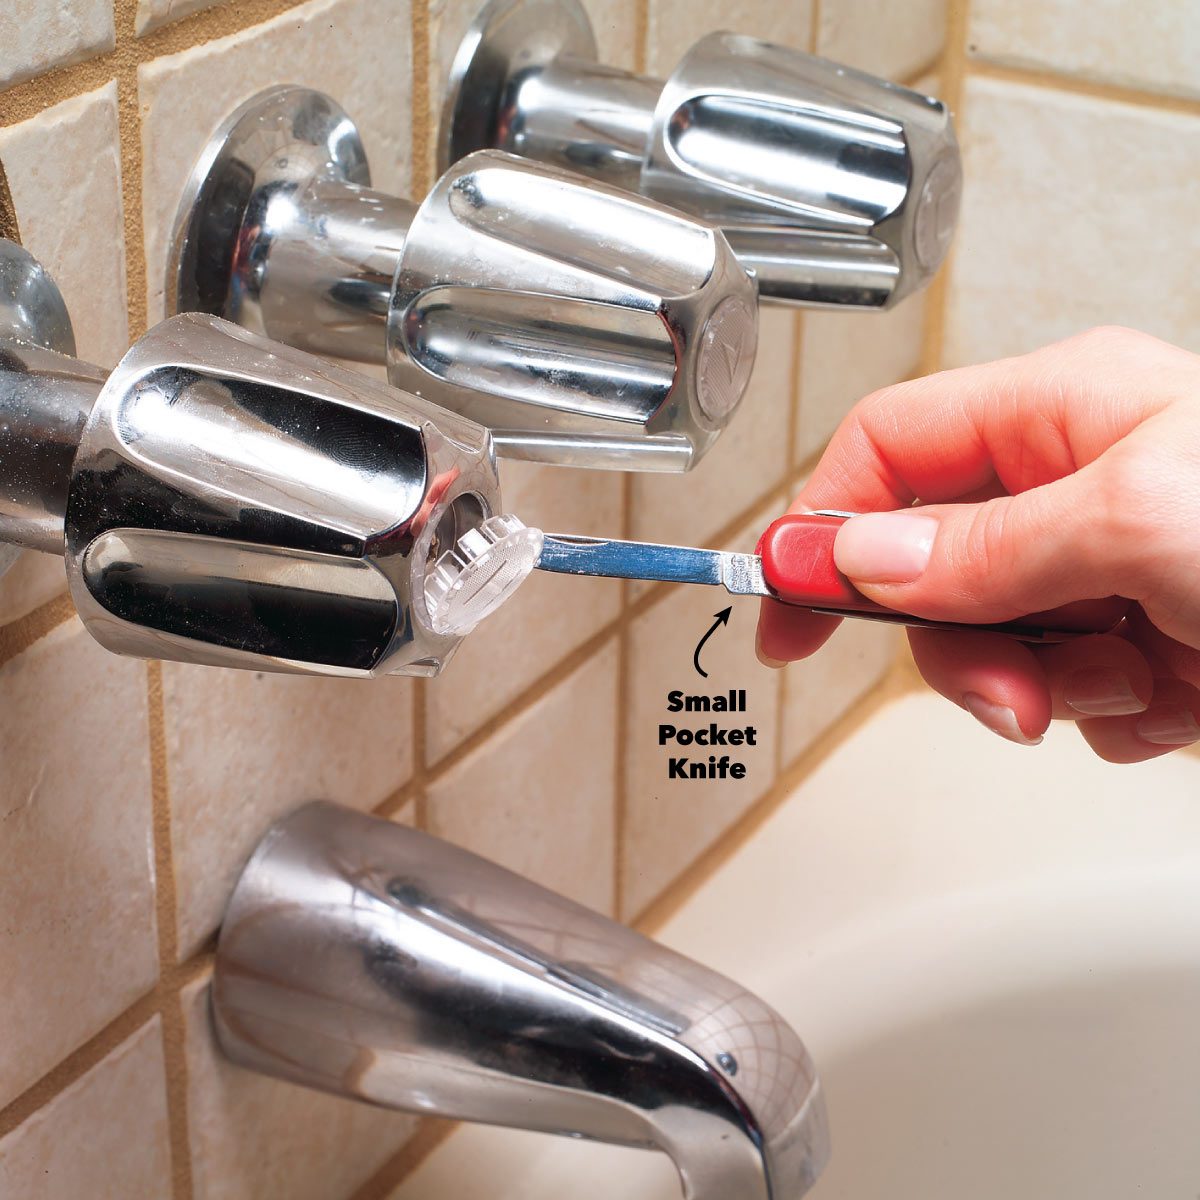 How To Fix A Leaking Bathtub Faucet The Family Handyman